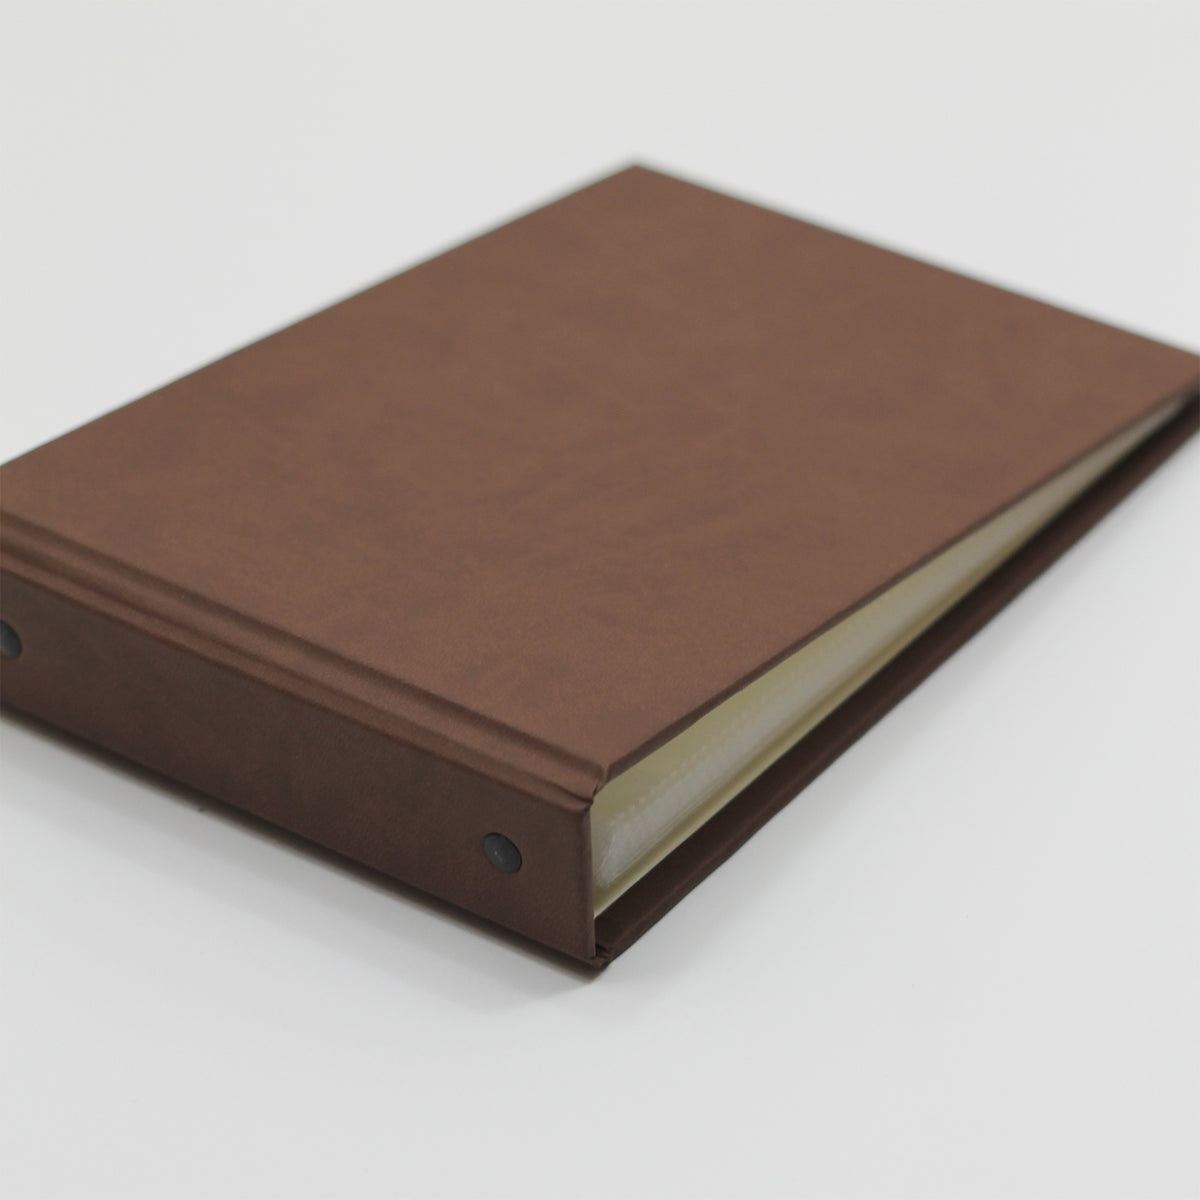 Small Photo Binder | for 5x7 Photos | with Mocha Vegan Leather Cover